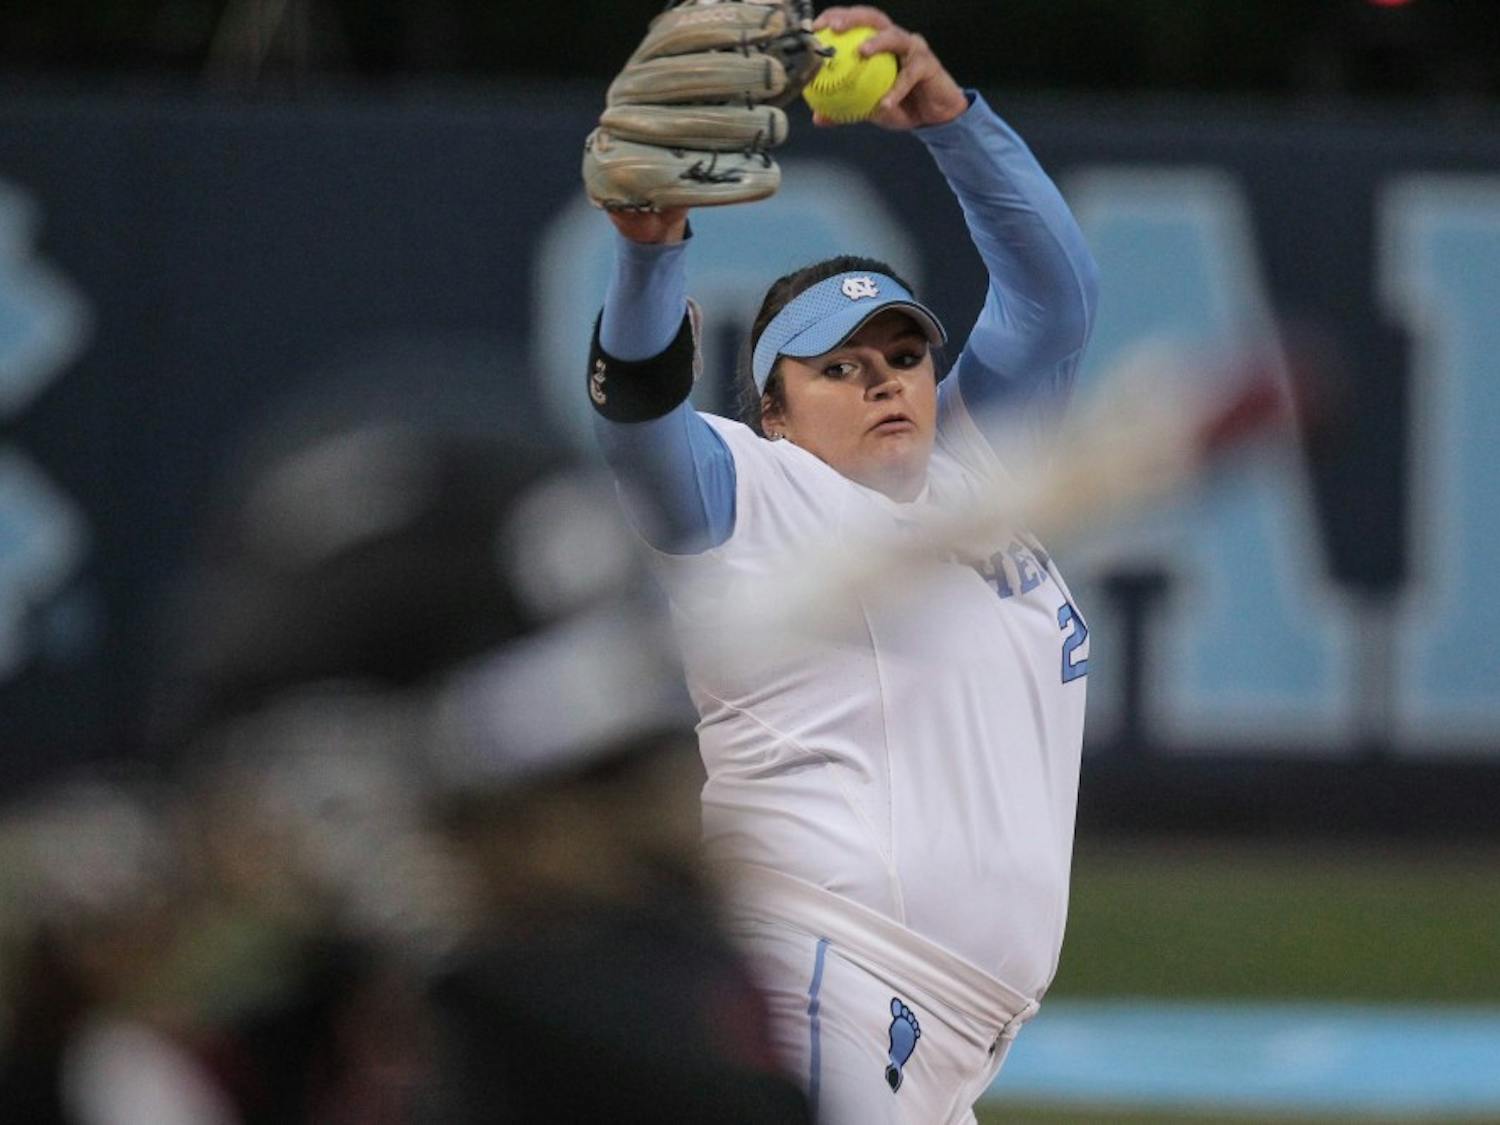 Brittany Pickett (28) throws a pitch during Game 3 against NC State on Monday, April 16.